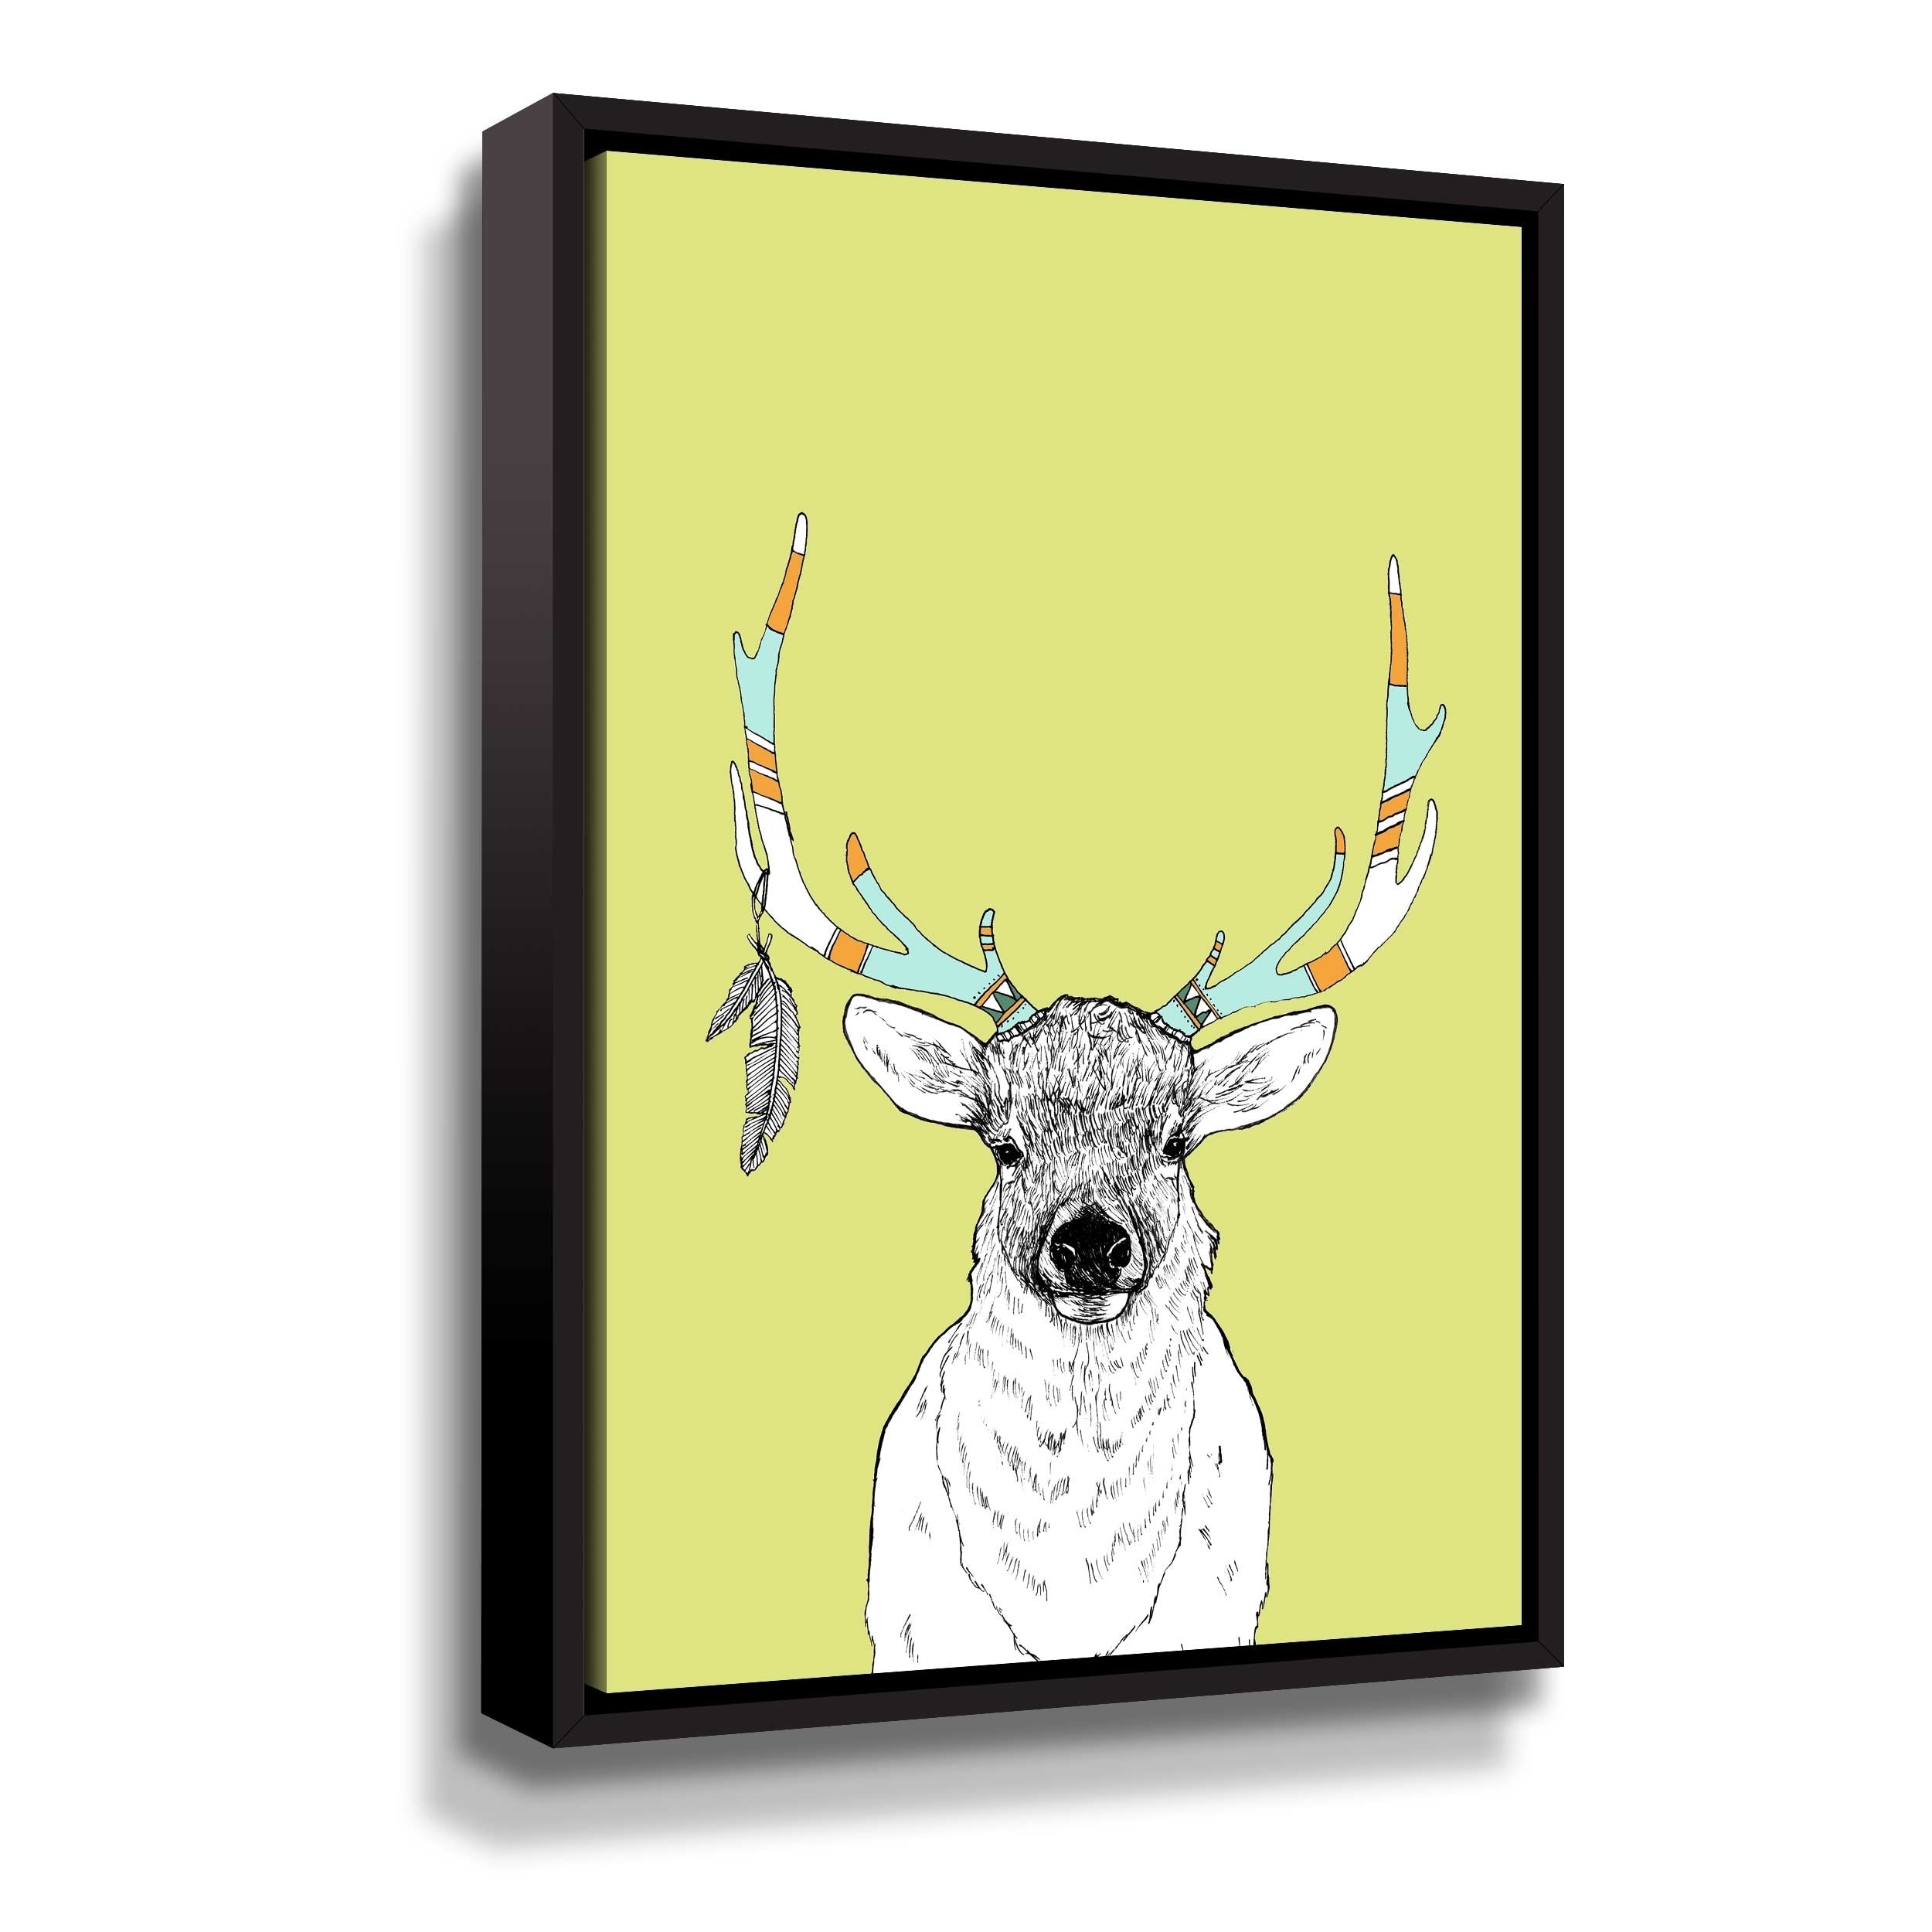 18 X 24 Sylvie Stag Profile Framed Canvas By Amy Peterson Art